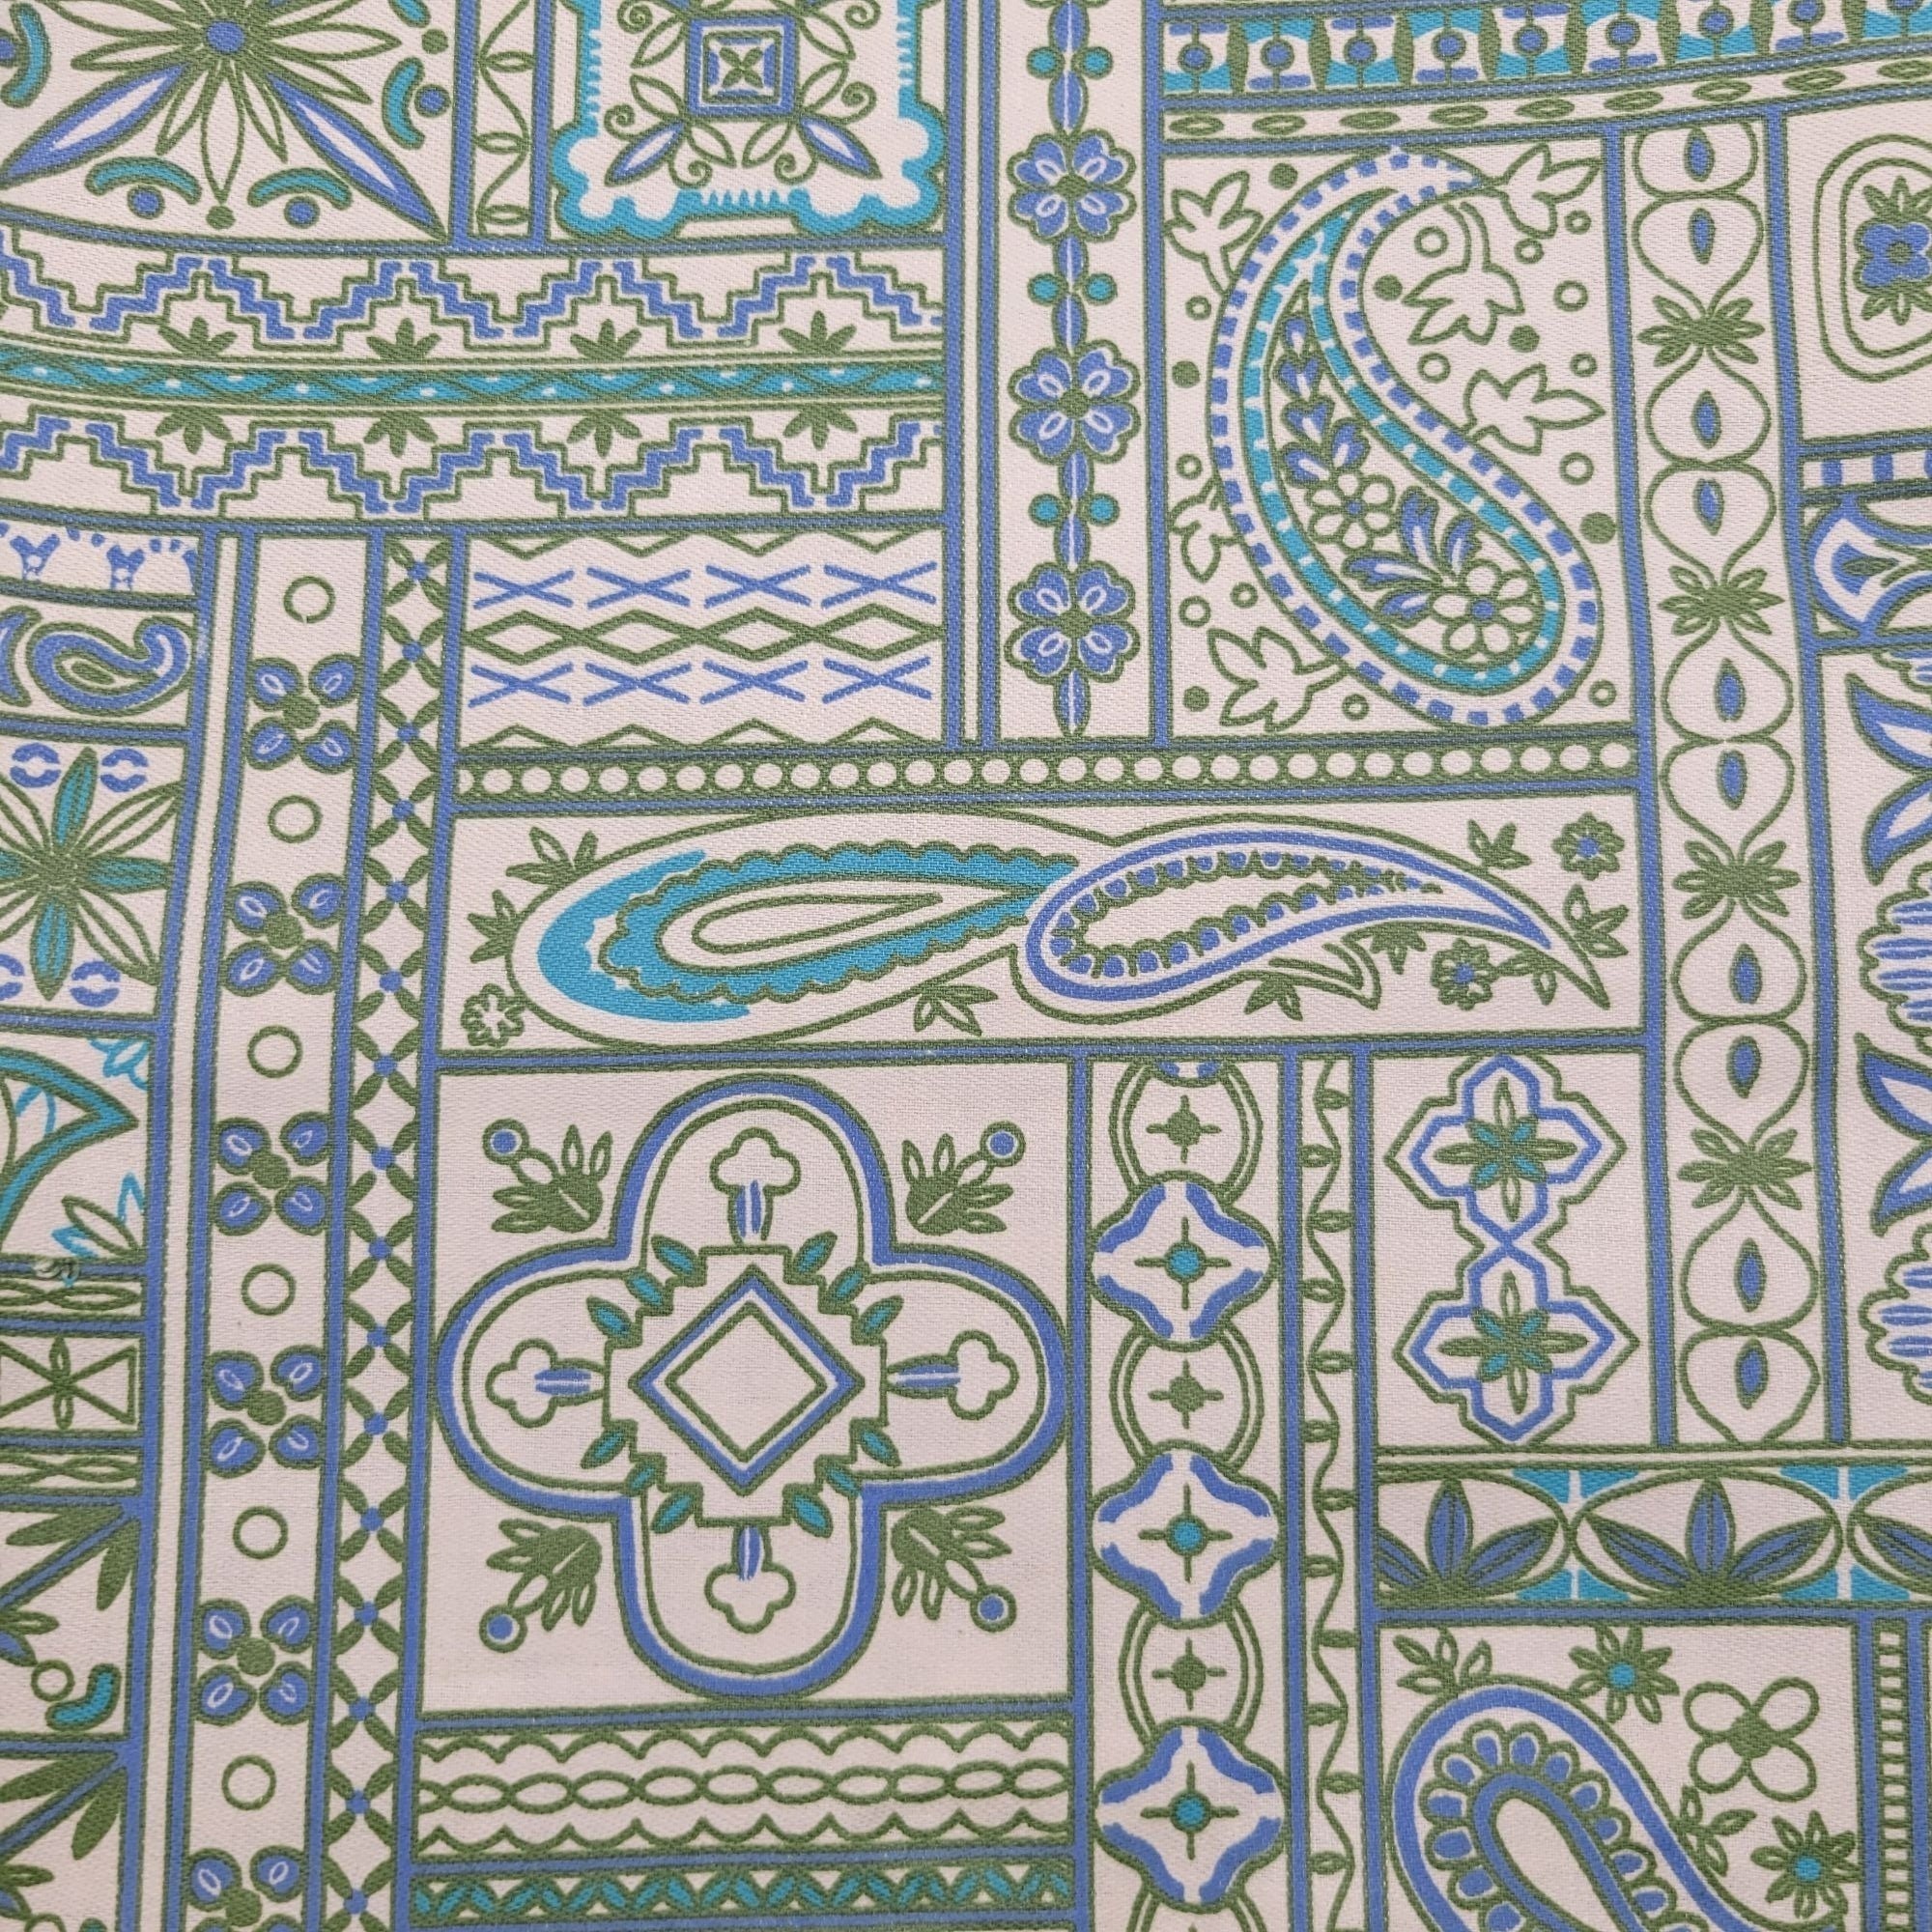 Cotton Quilting Sewing Fabric by the Yard, Tokyo Rococo by Carol Van Zandt  for Andover Fabrics, Home Piecing, Clothing Textiles, Green 